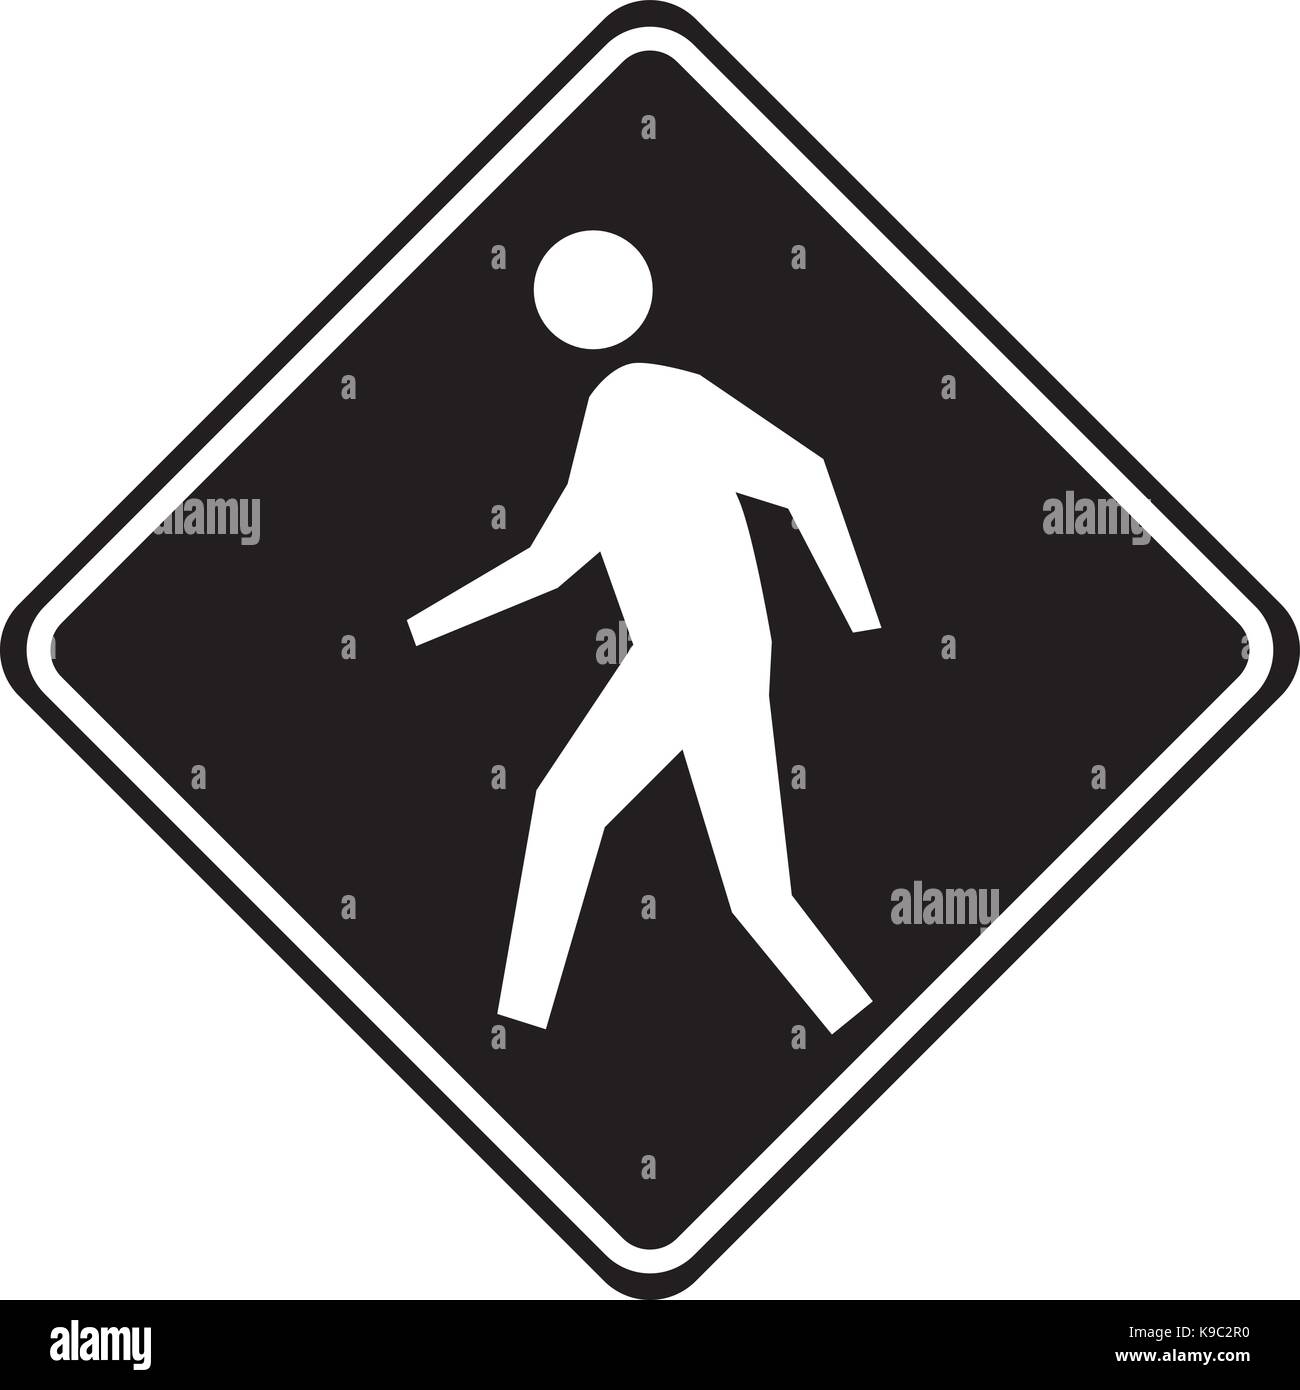 People crossing warning traffic sign Stock Vector